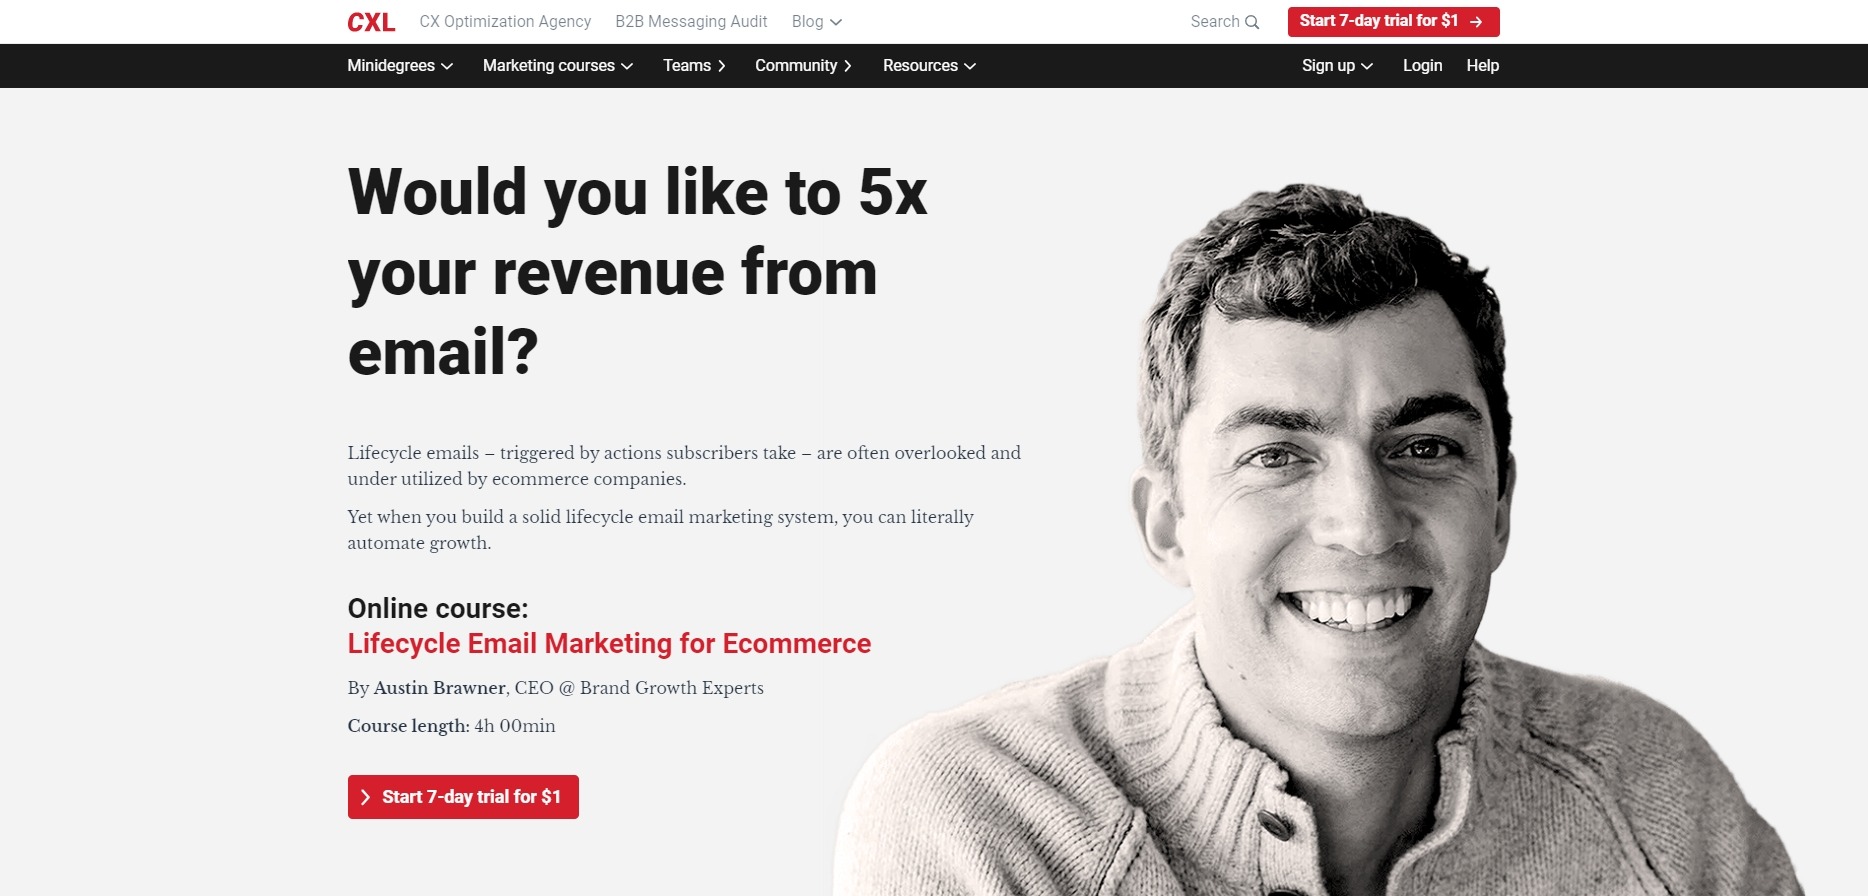 Lifecycle Email Marketing for Ecommerce by Conversion Xl